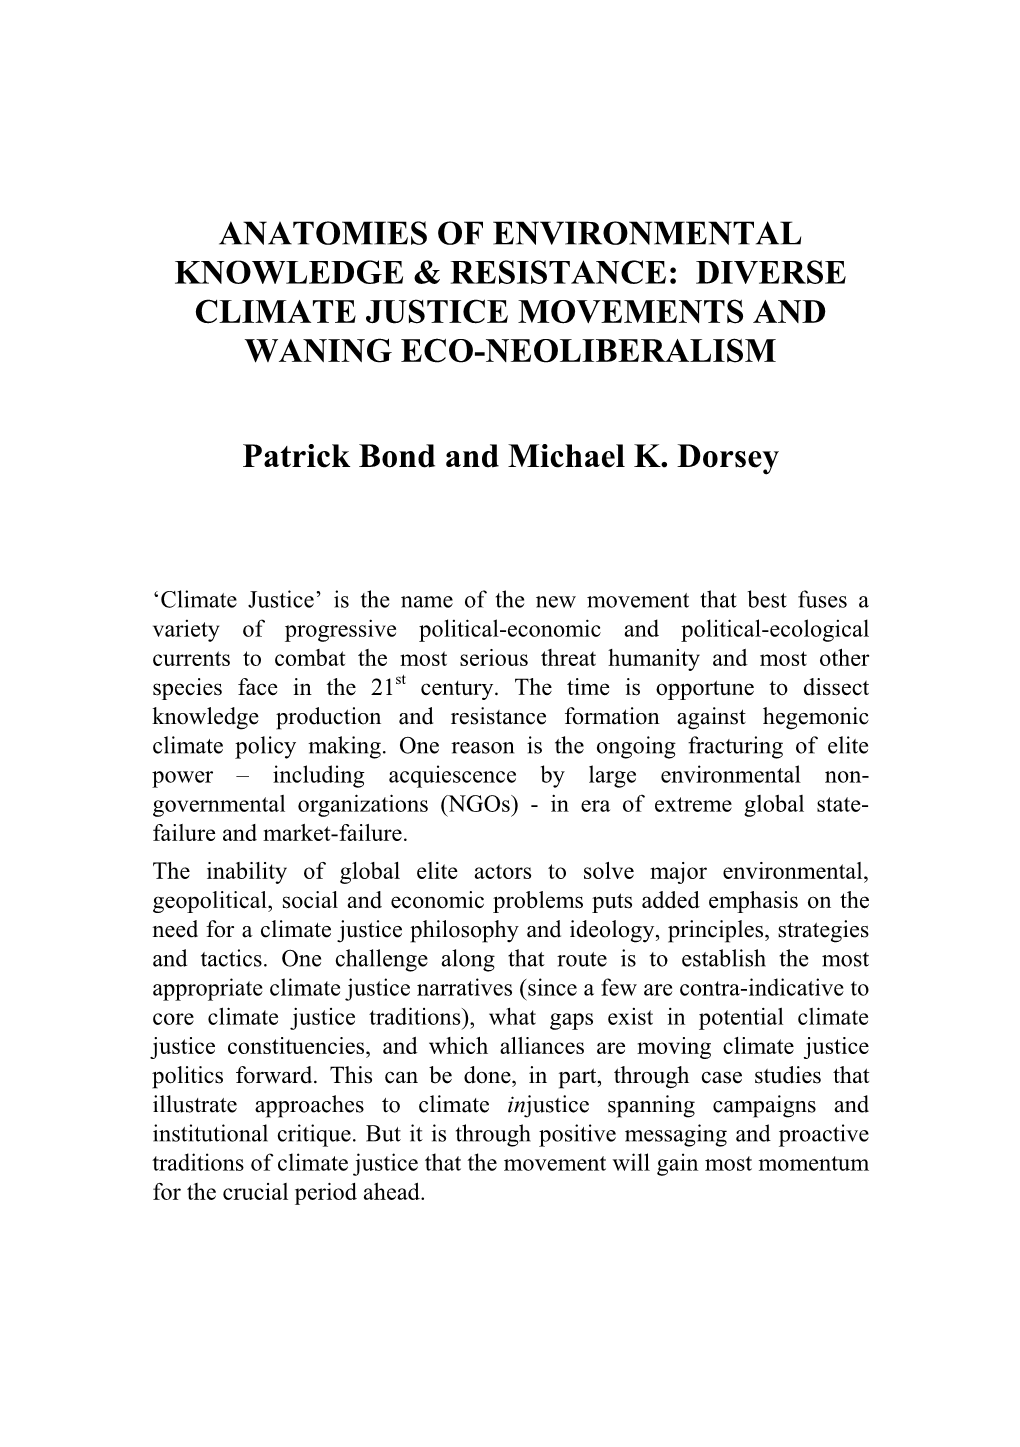 Anatomies of Environmental Knowledge and Resistance